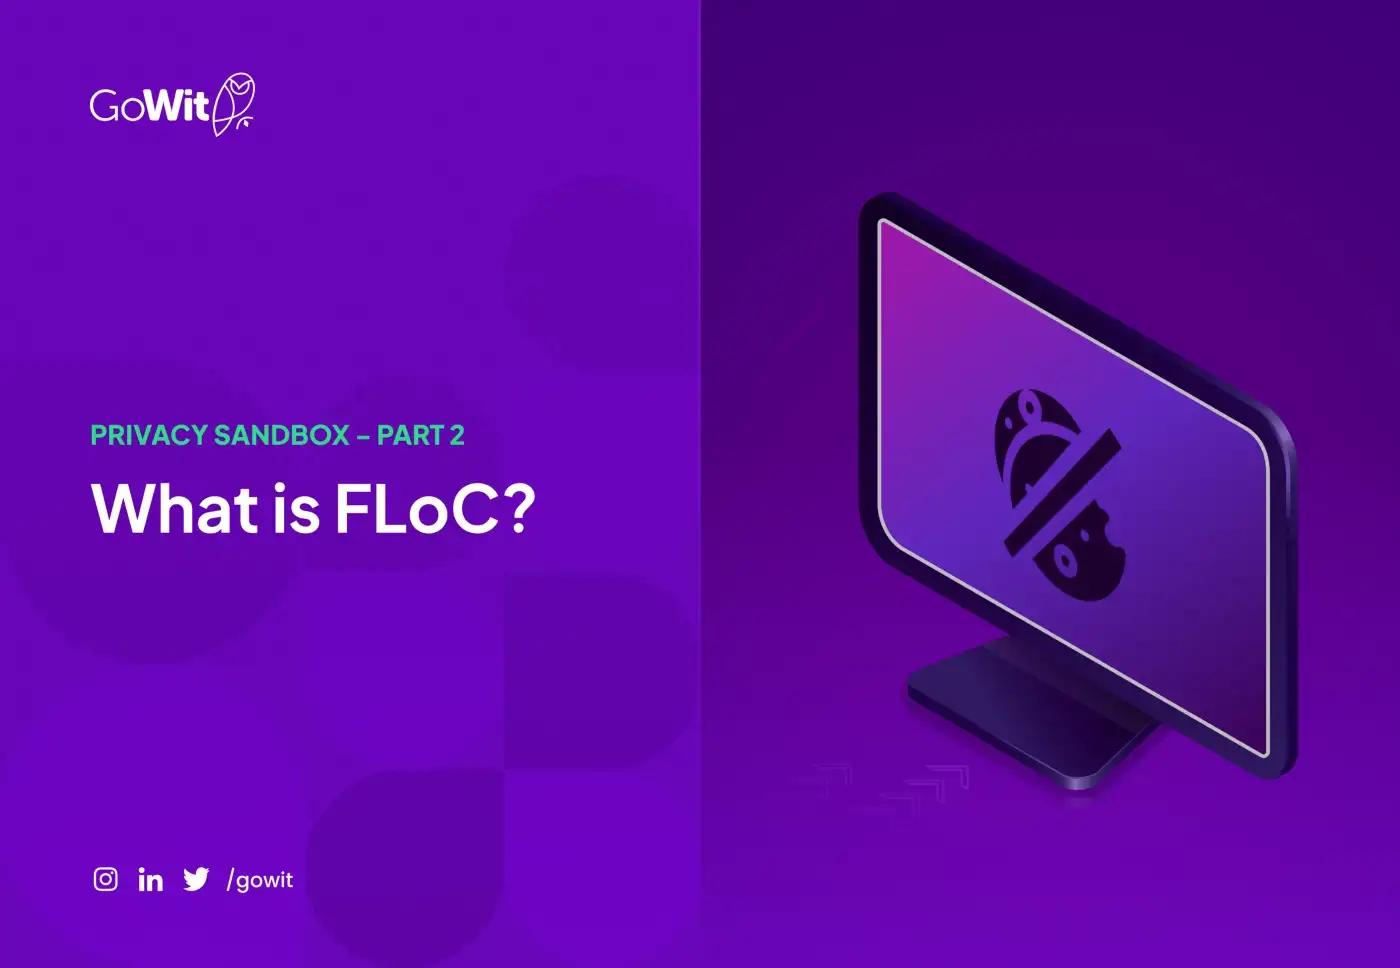 What is FLoC?